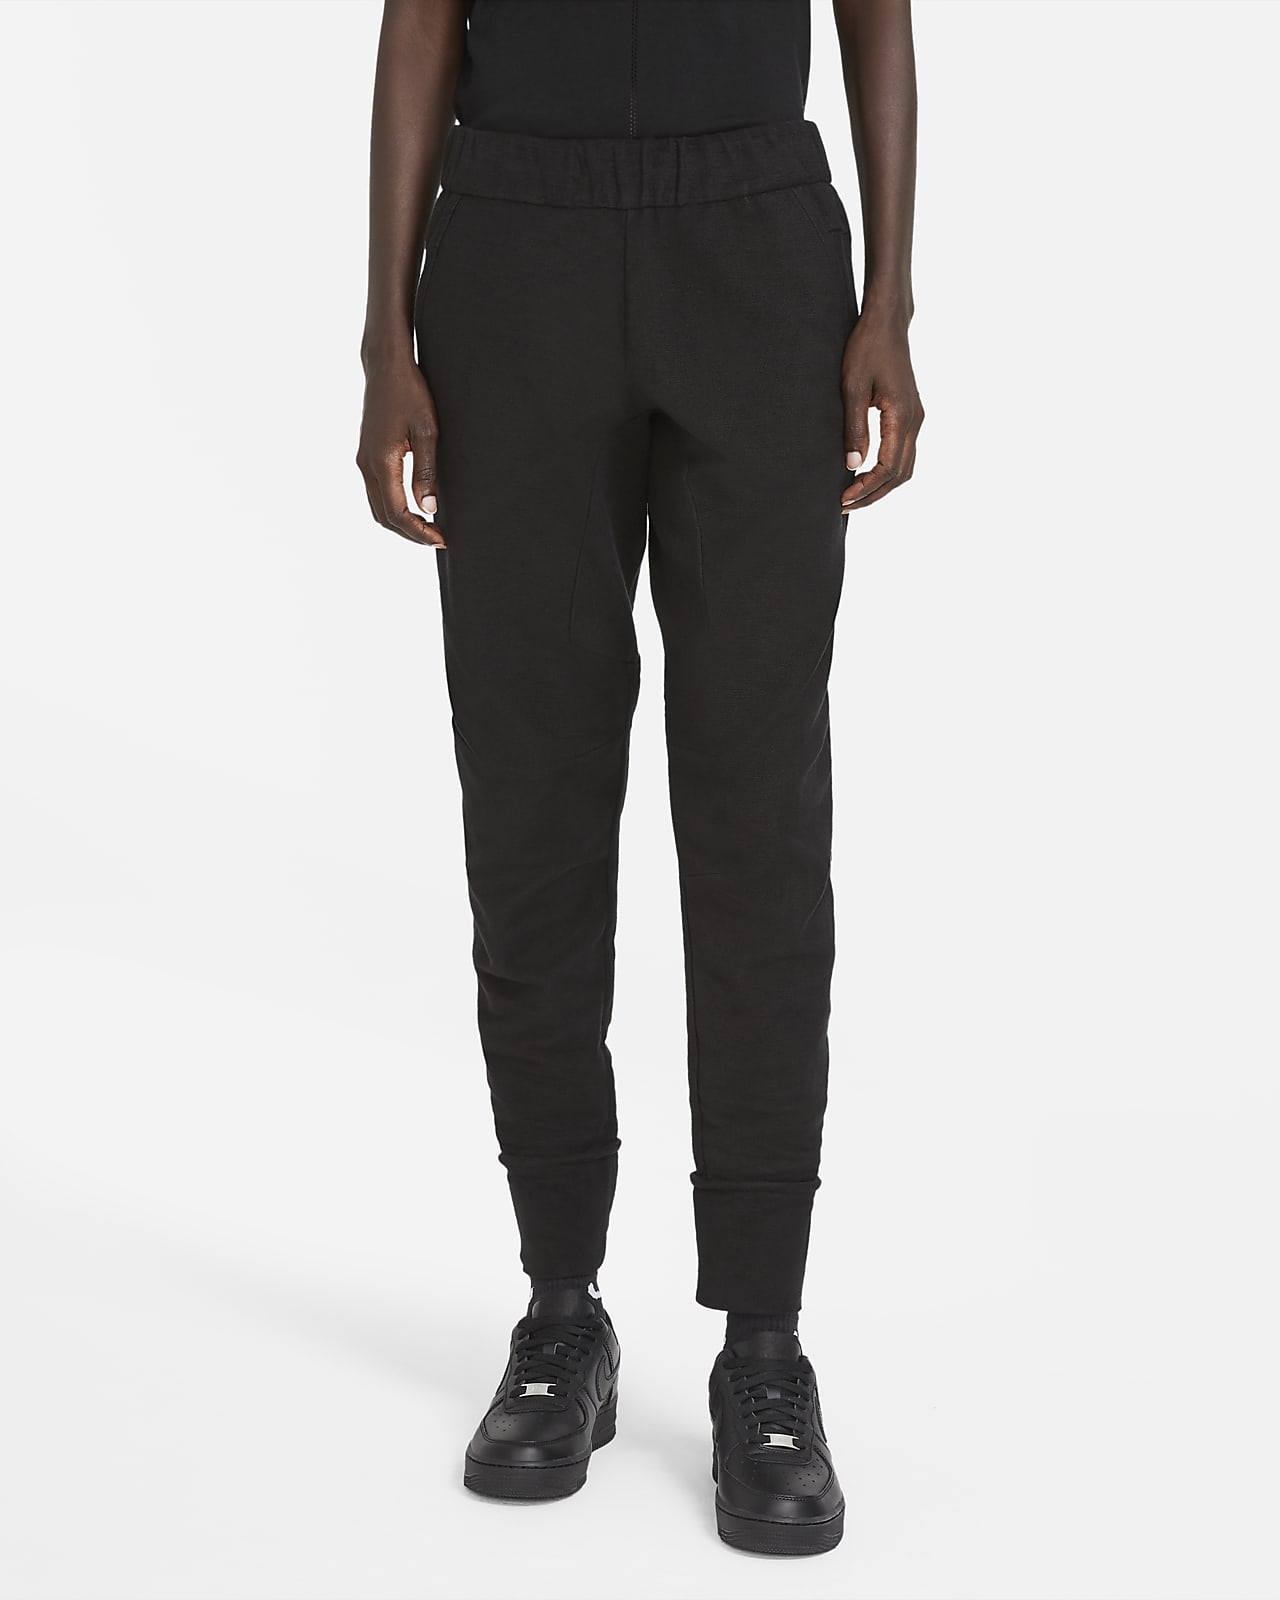 nike track and field joggers